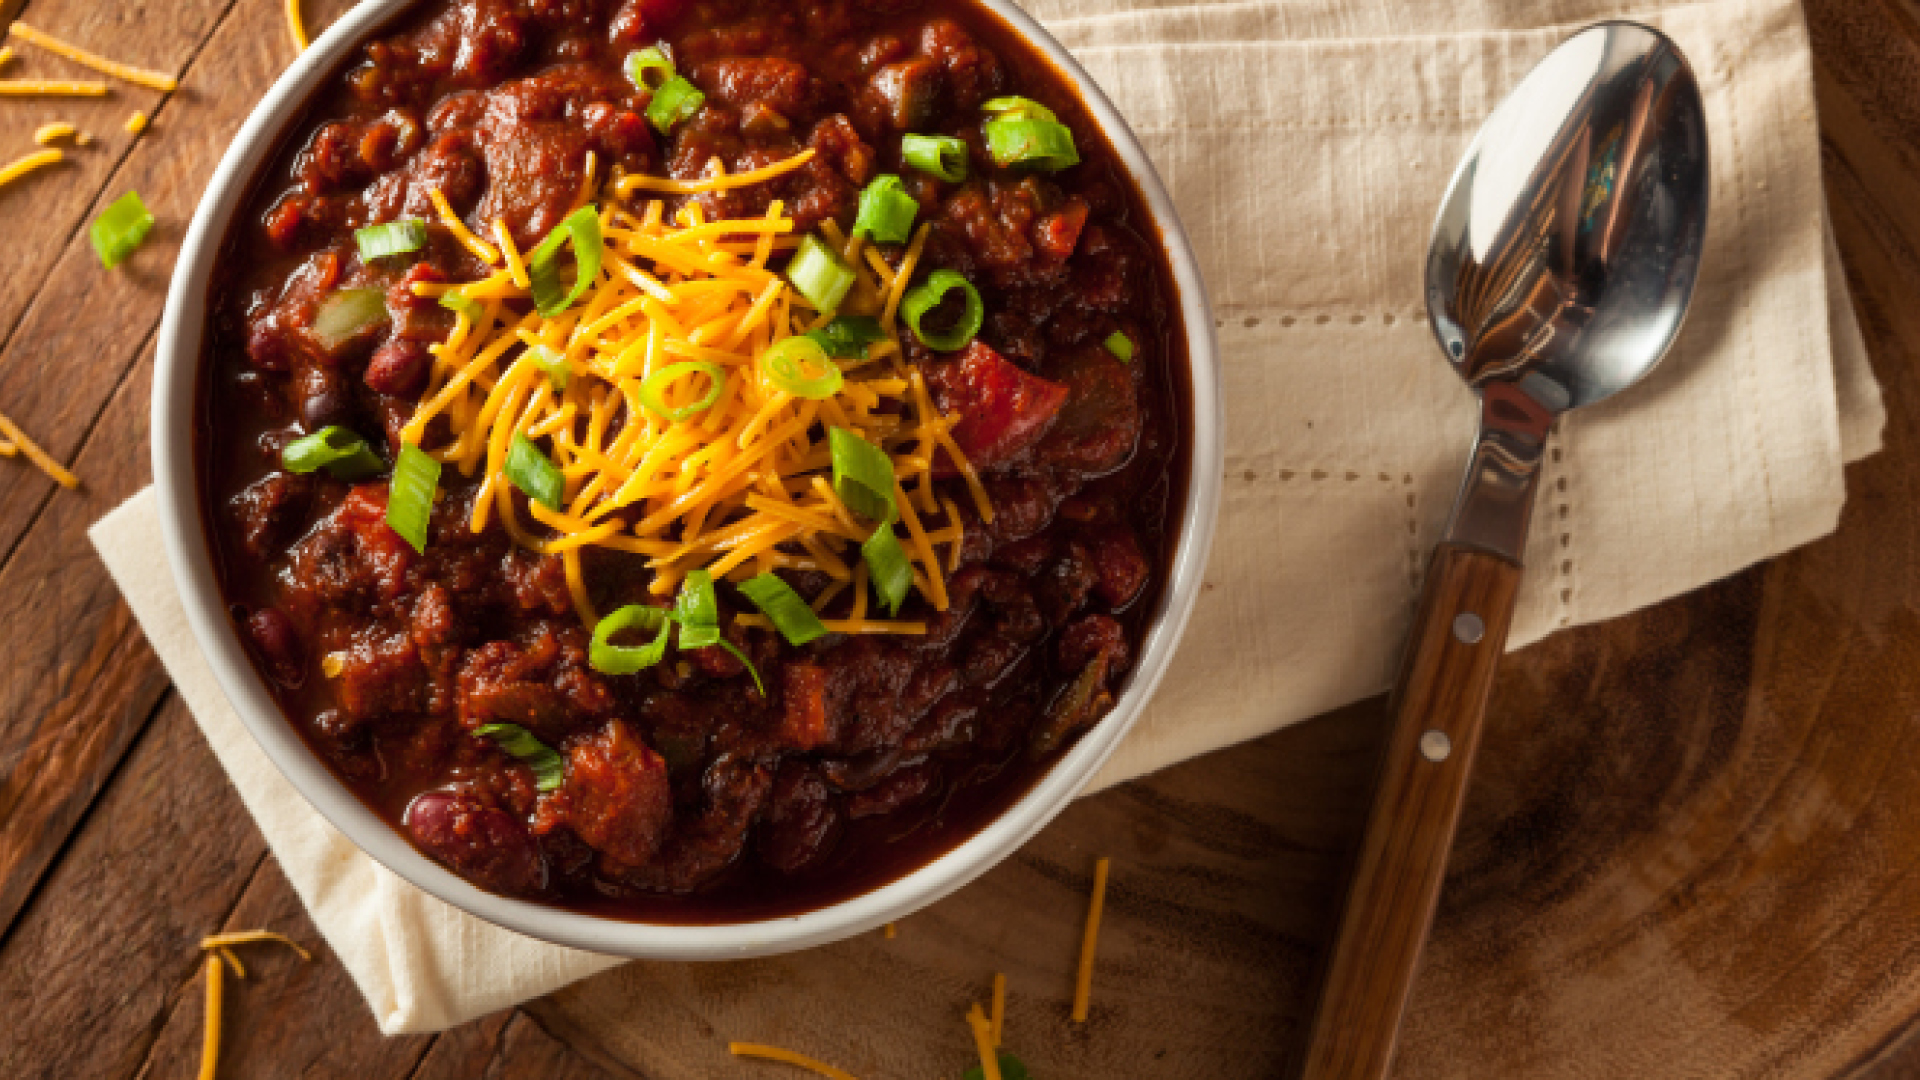 Bowl of chili with our compliments.